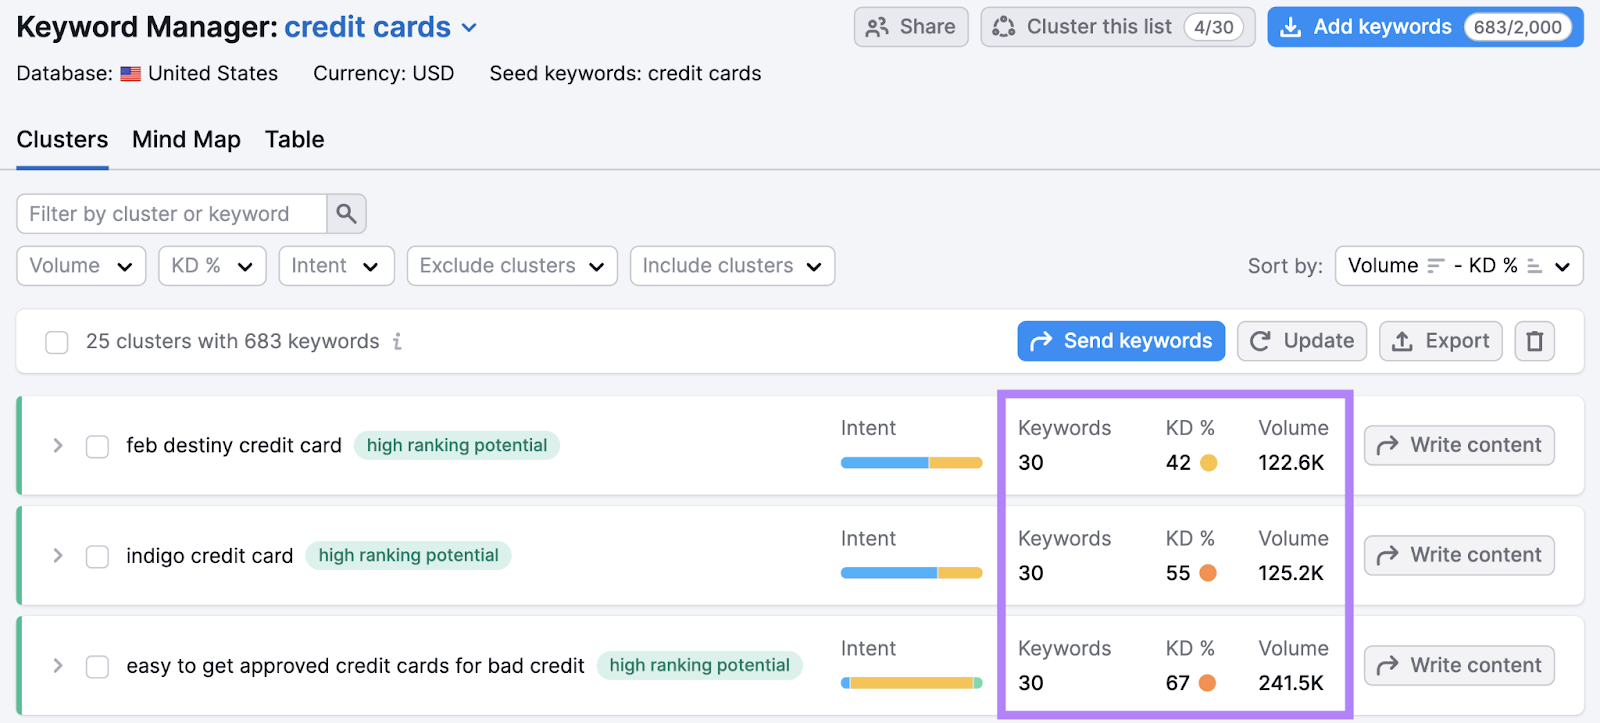 Clusters dashboard successful  Keyword Manager